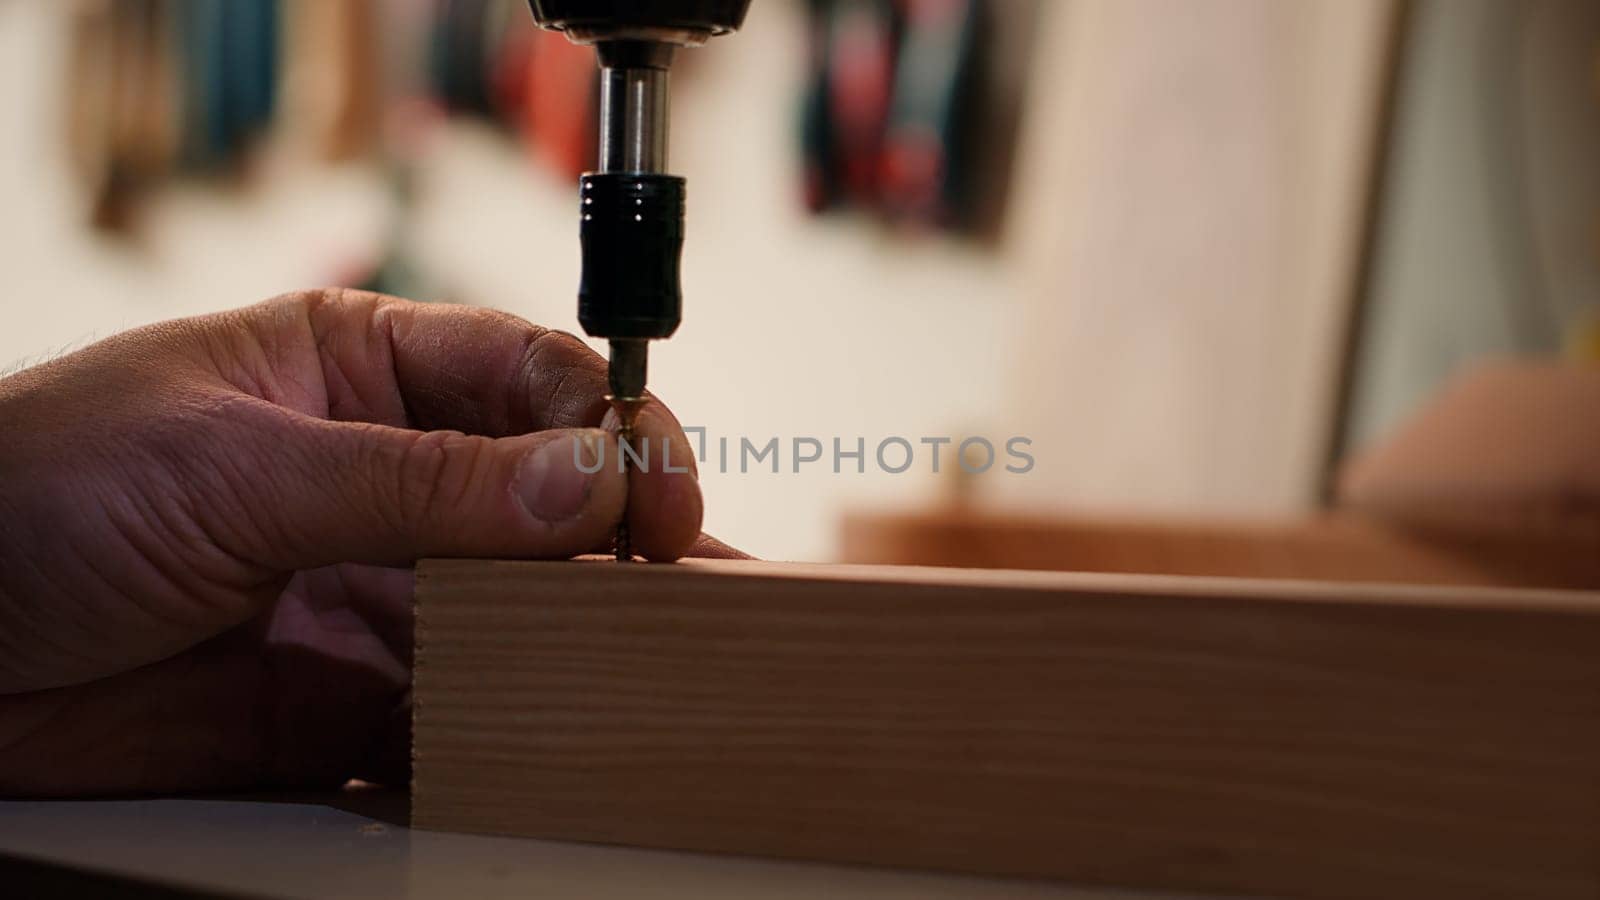 Carpenter sinks screws into wooden surfaces with power drill, close up by DCStudio